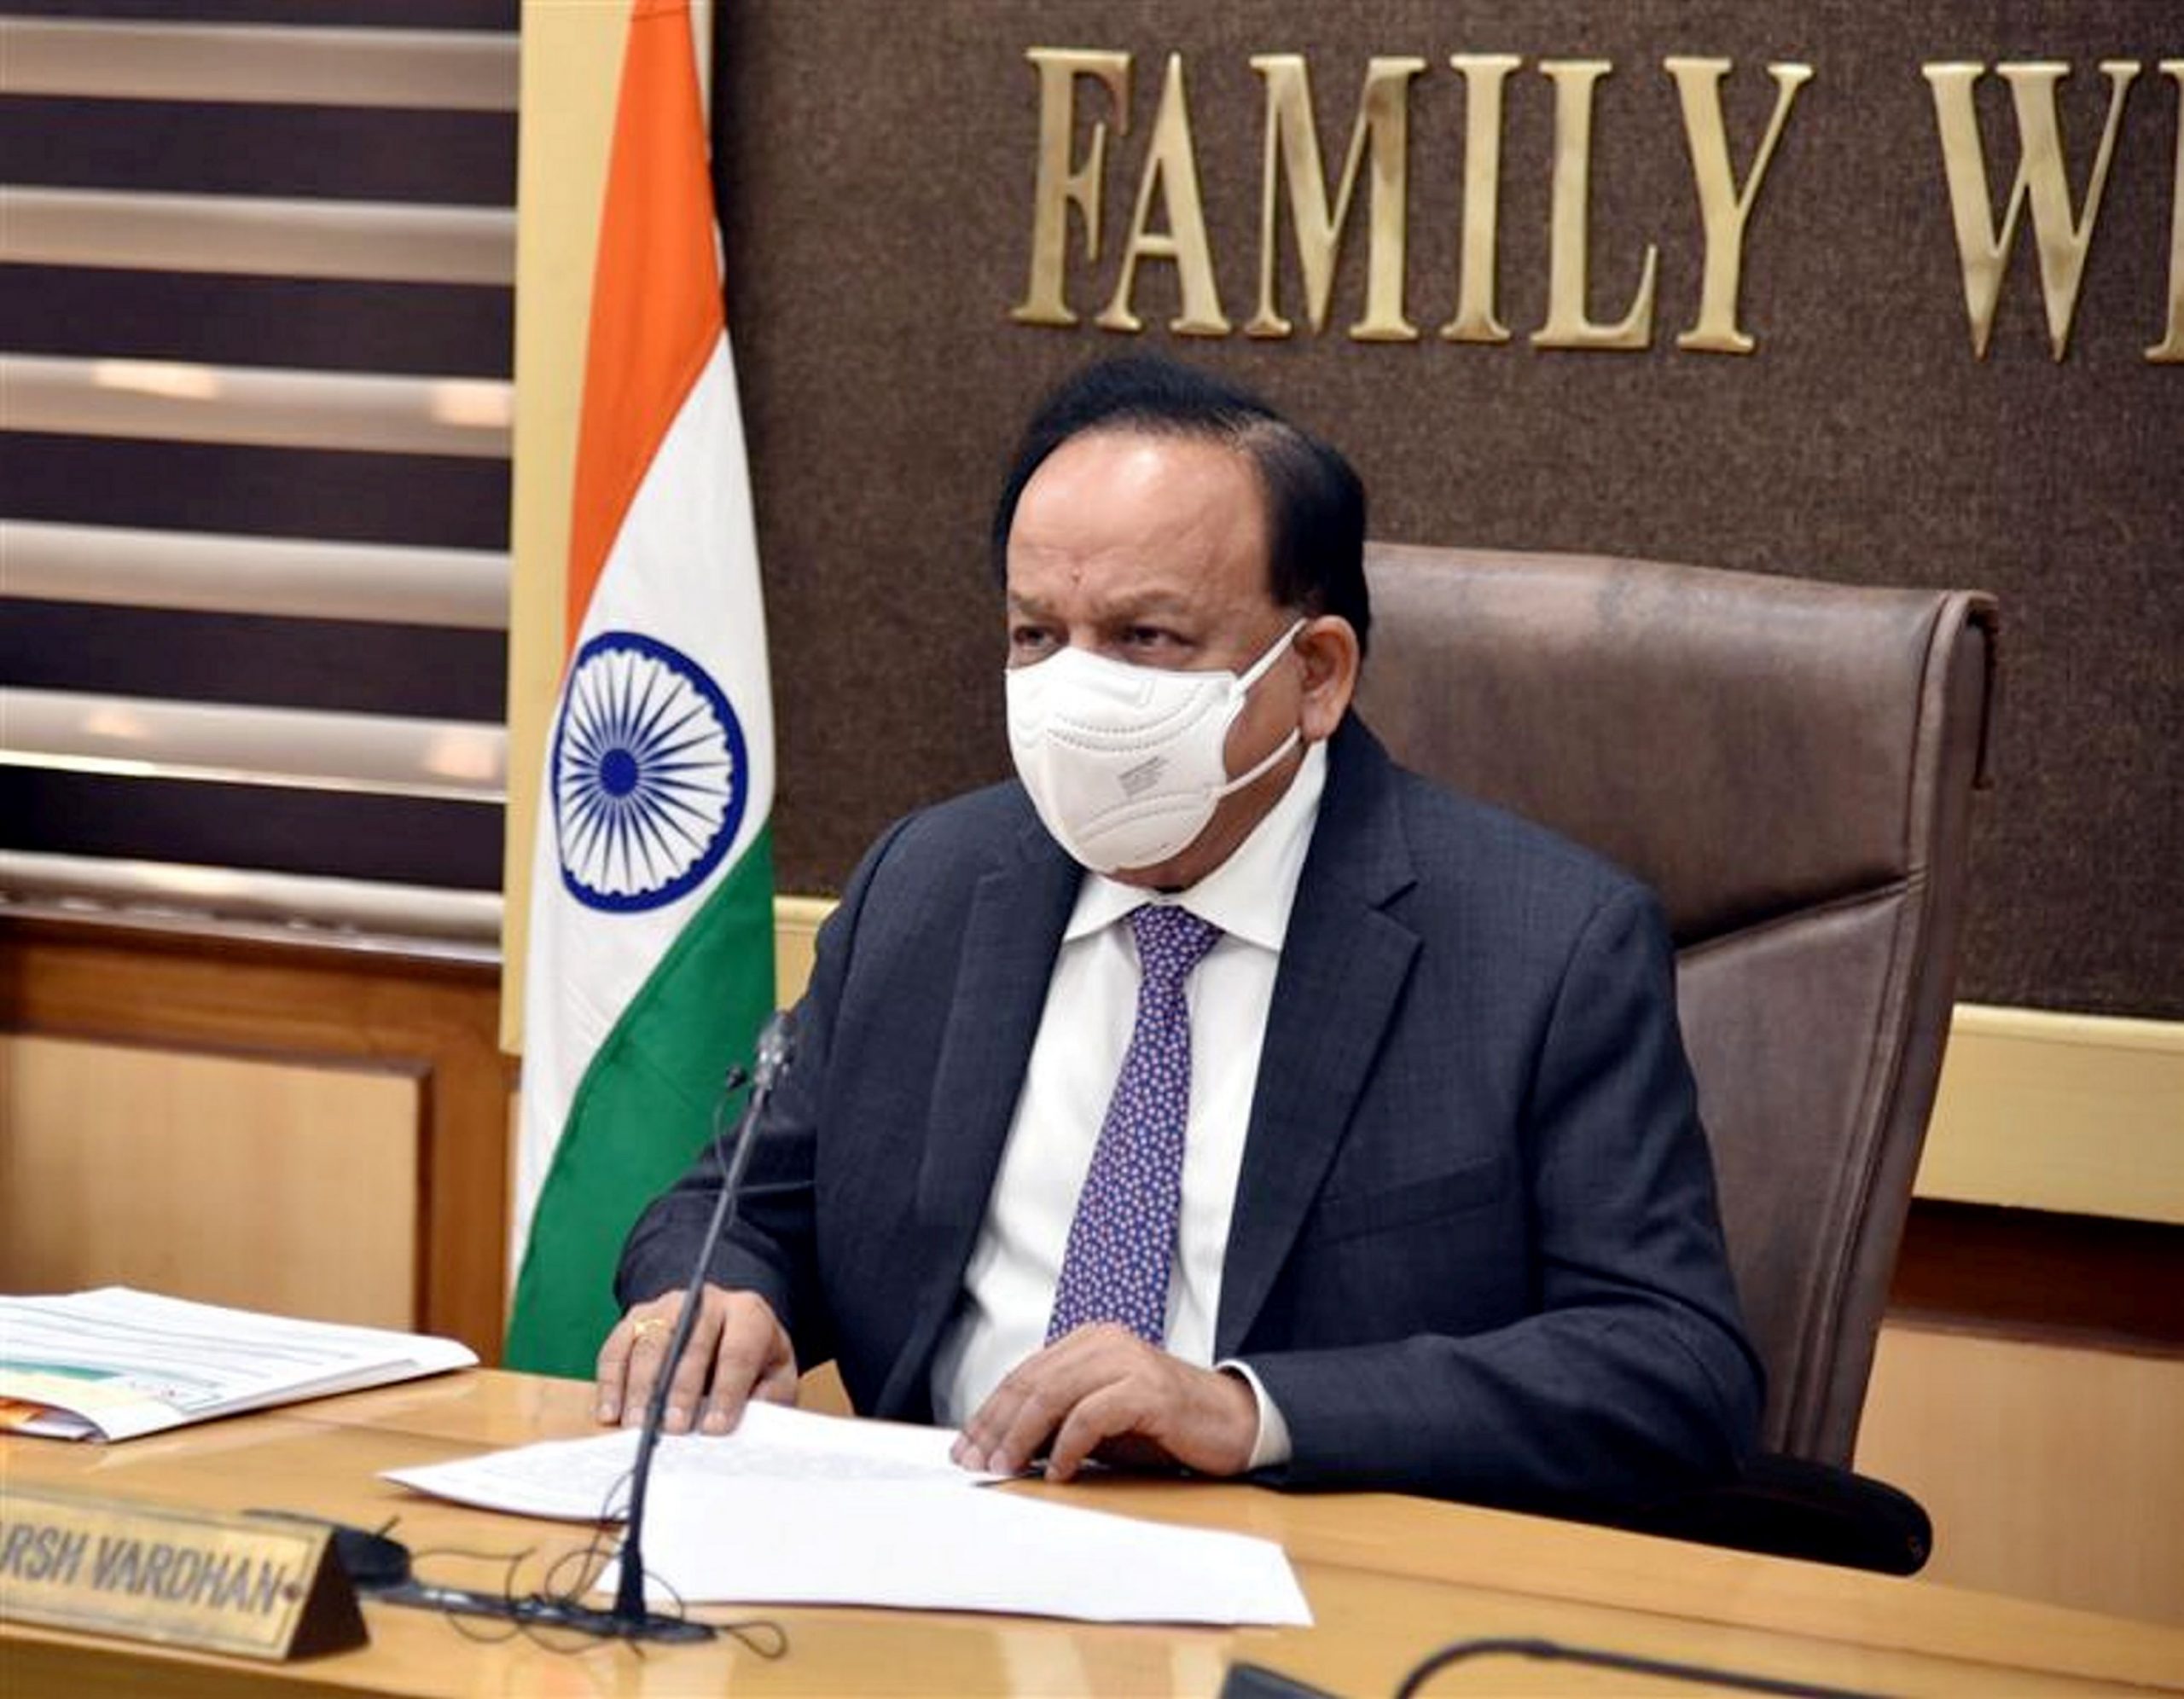 Healthcare workers, people above 65 will be vaccinated on priority: Harsh Vardhan